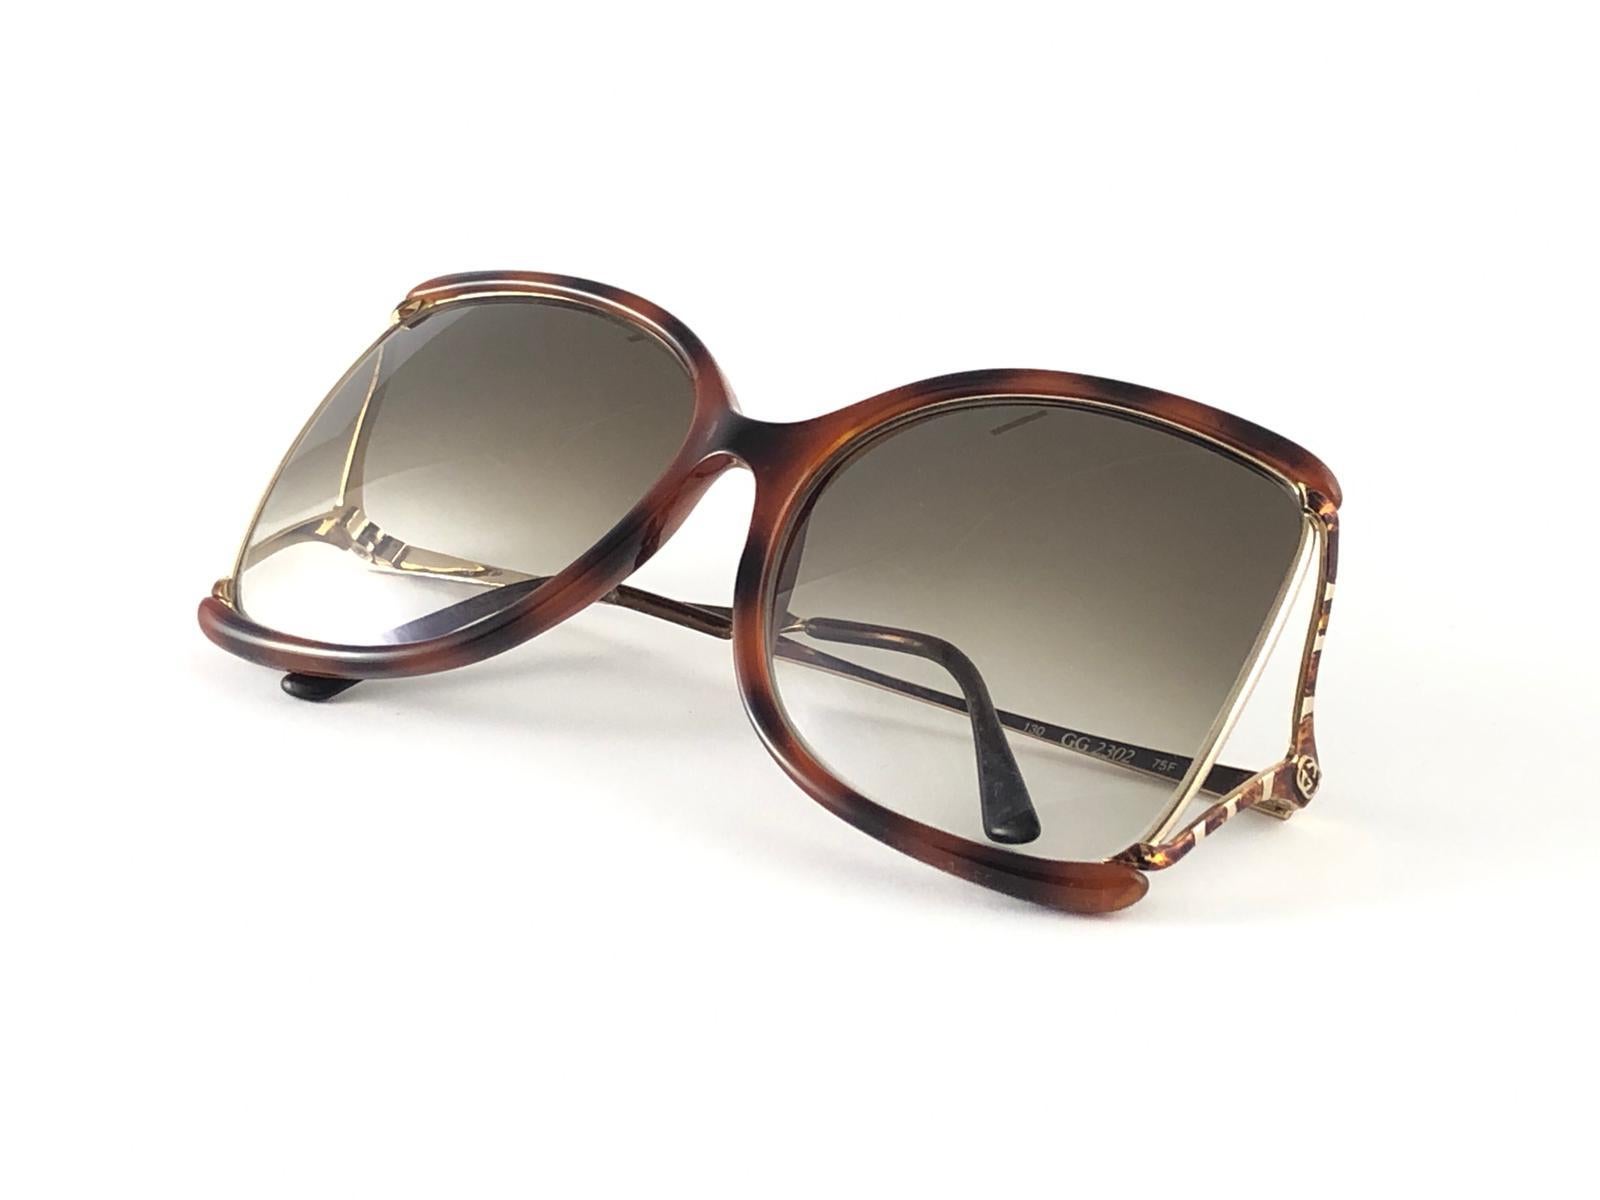 New Vintage Gucci 2302 Tortoise & Gold Accents Sunglasses 1980's Made in Italy 2